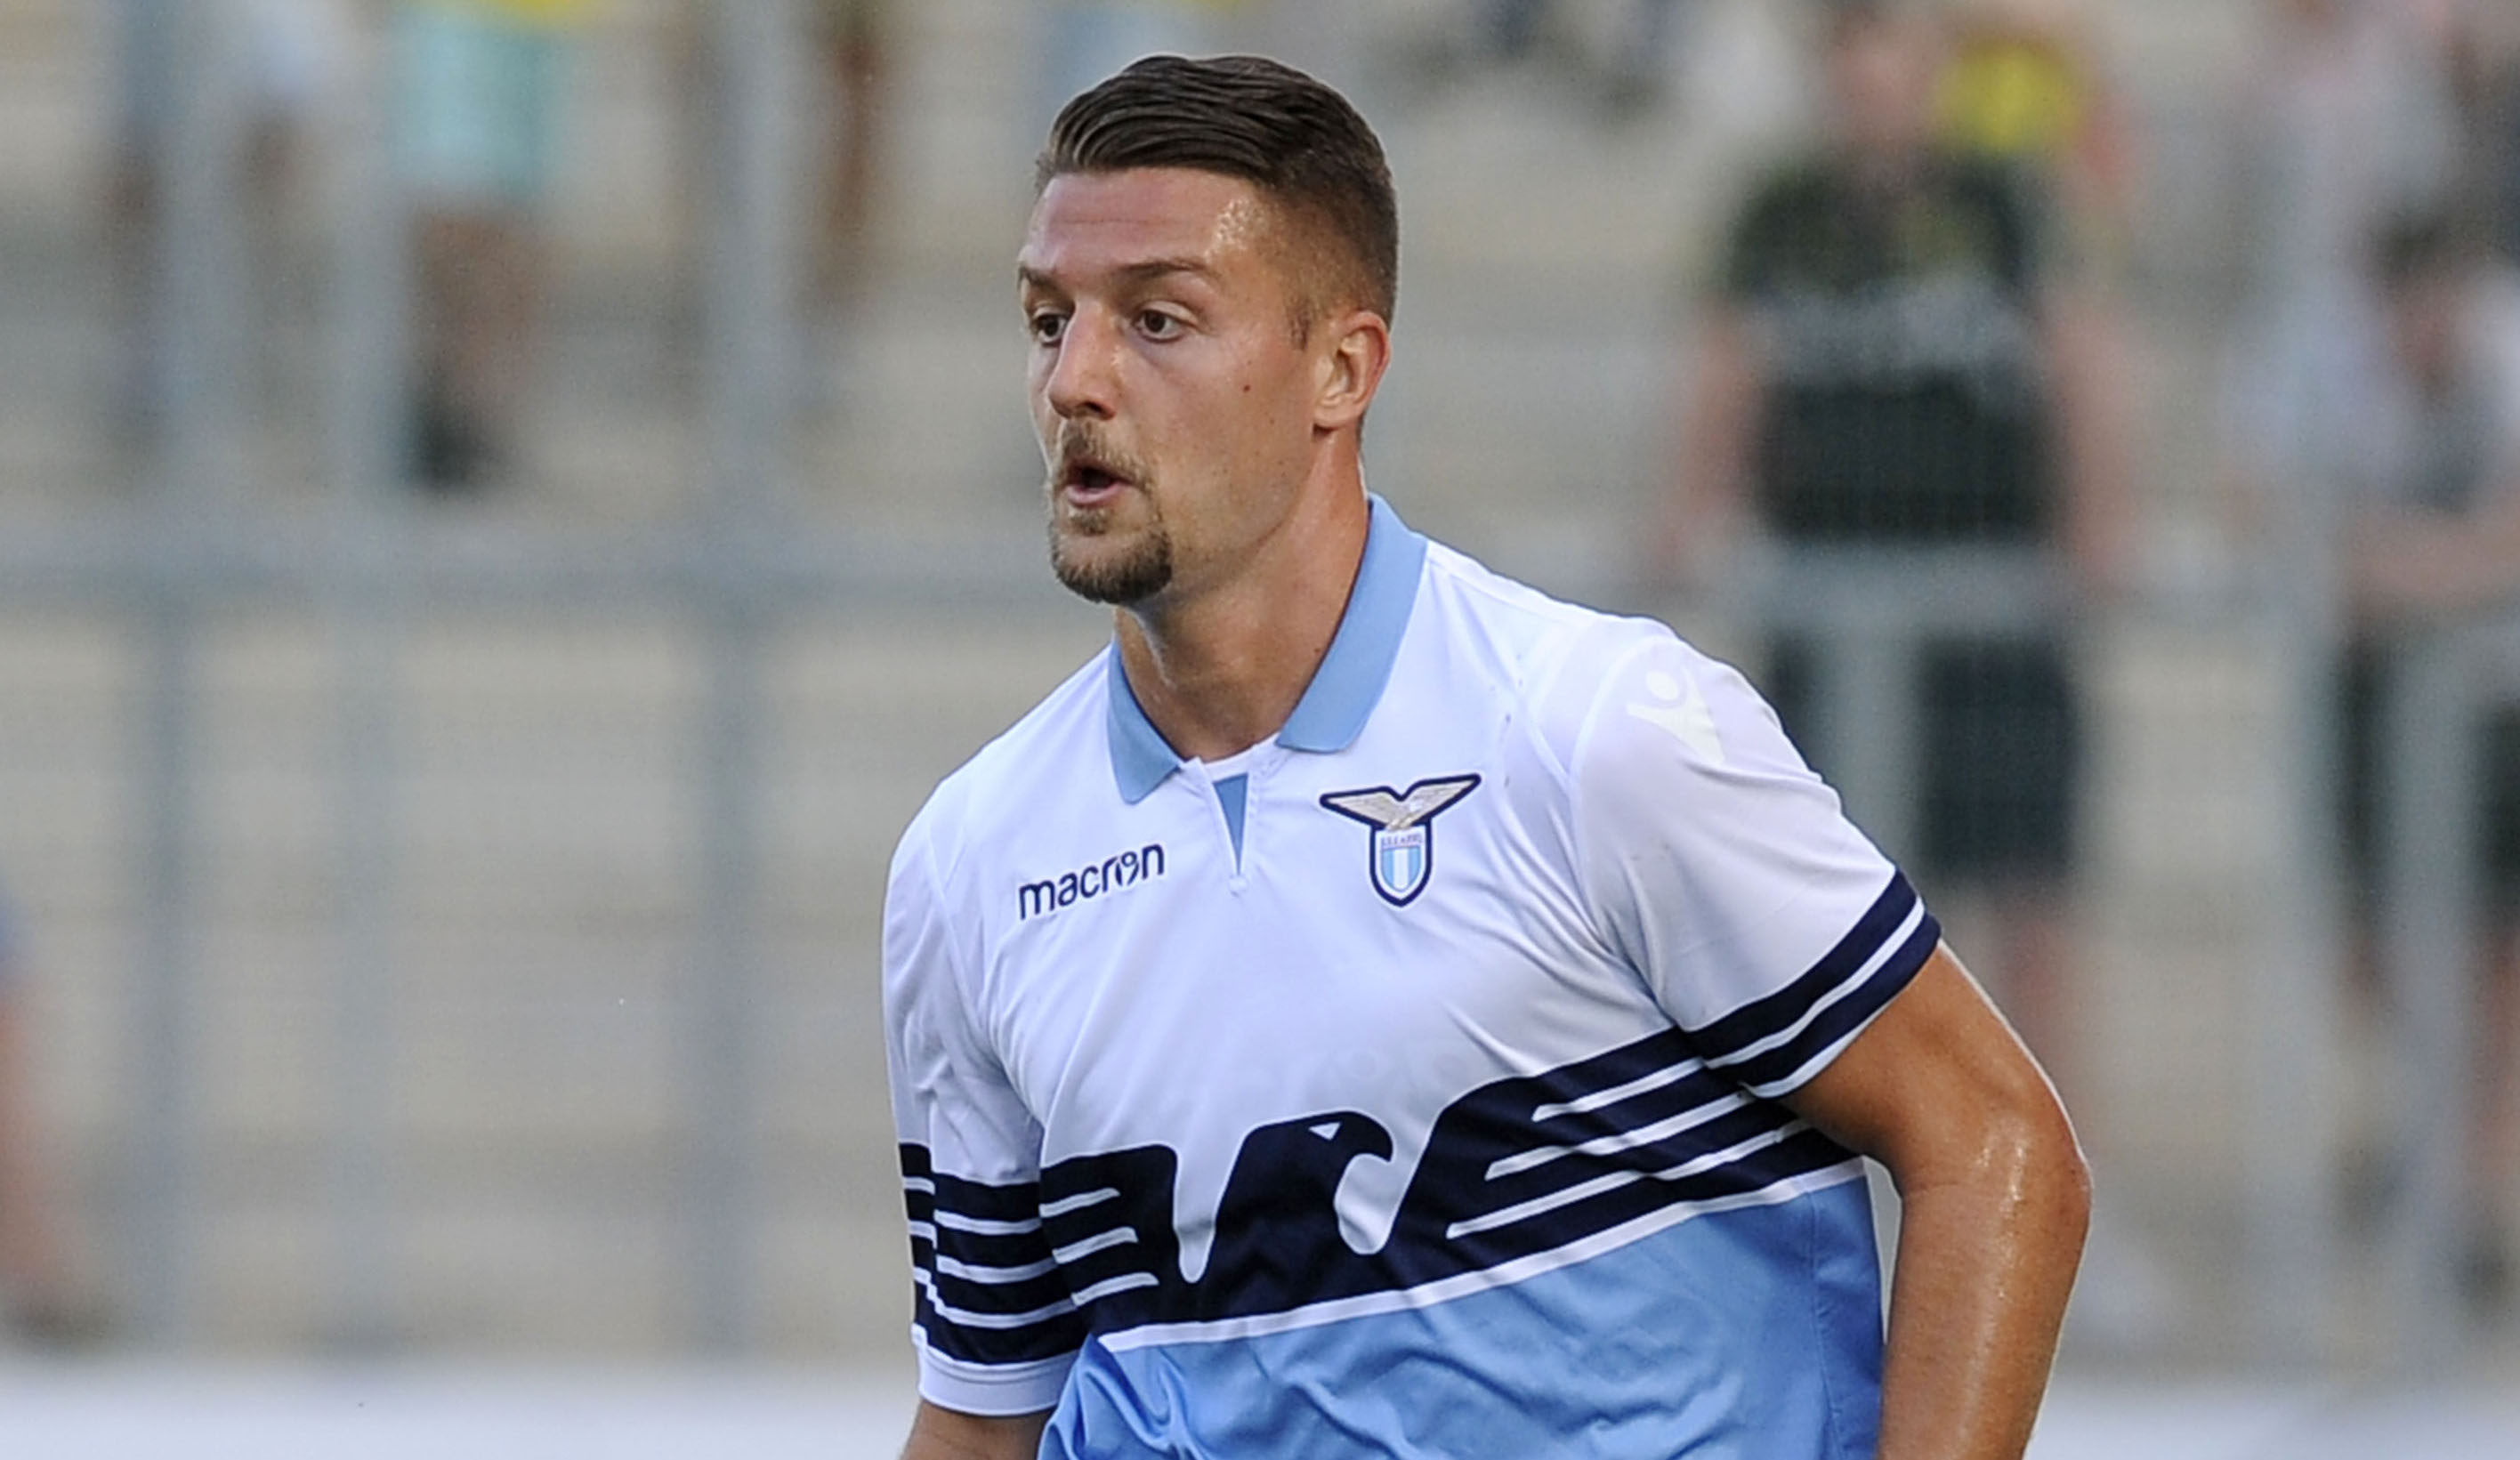 ESSEN, GERMANY - AUGUST 12: Sergej Milinkovic Savic of SS Lazio in action of Borussia Dortmund during the Borussia Dortmund v Lazio - Pre-Season Friendly at the Essen Stadium on August 12, 2018 in Essen, Germany. (Photo by Marco Rosi/Getty Images)